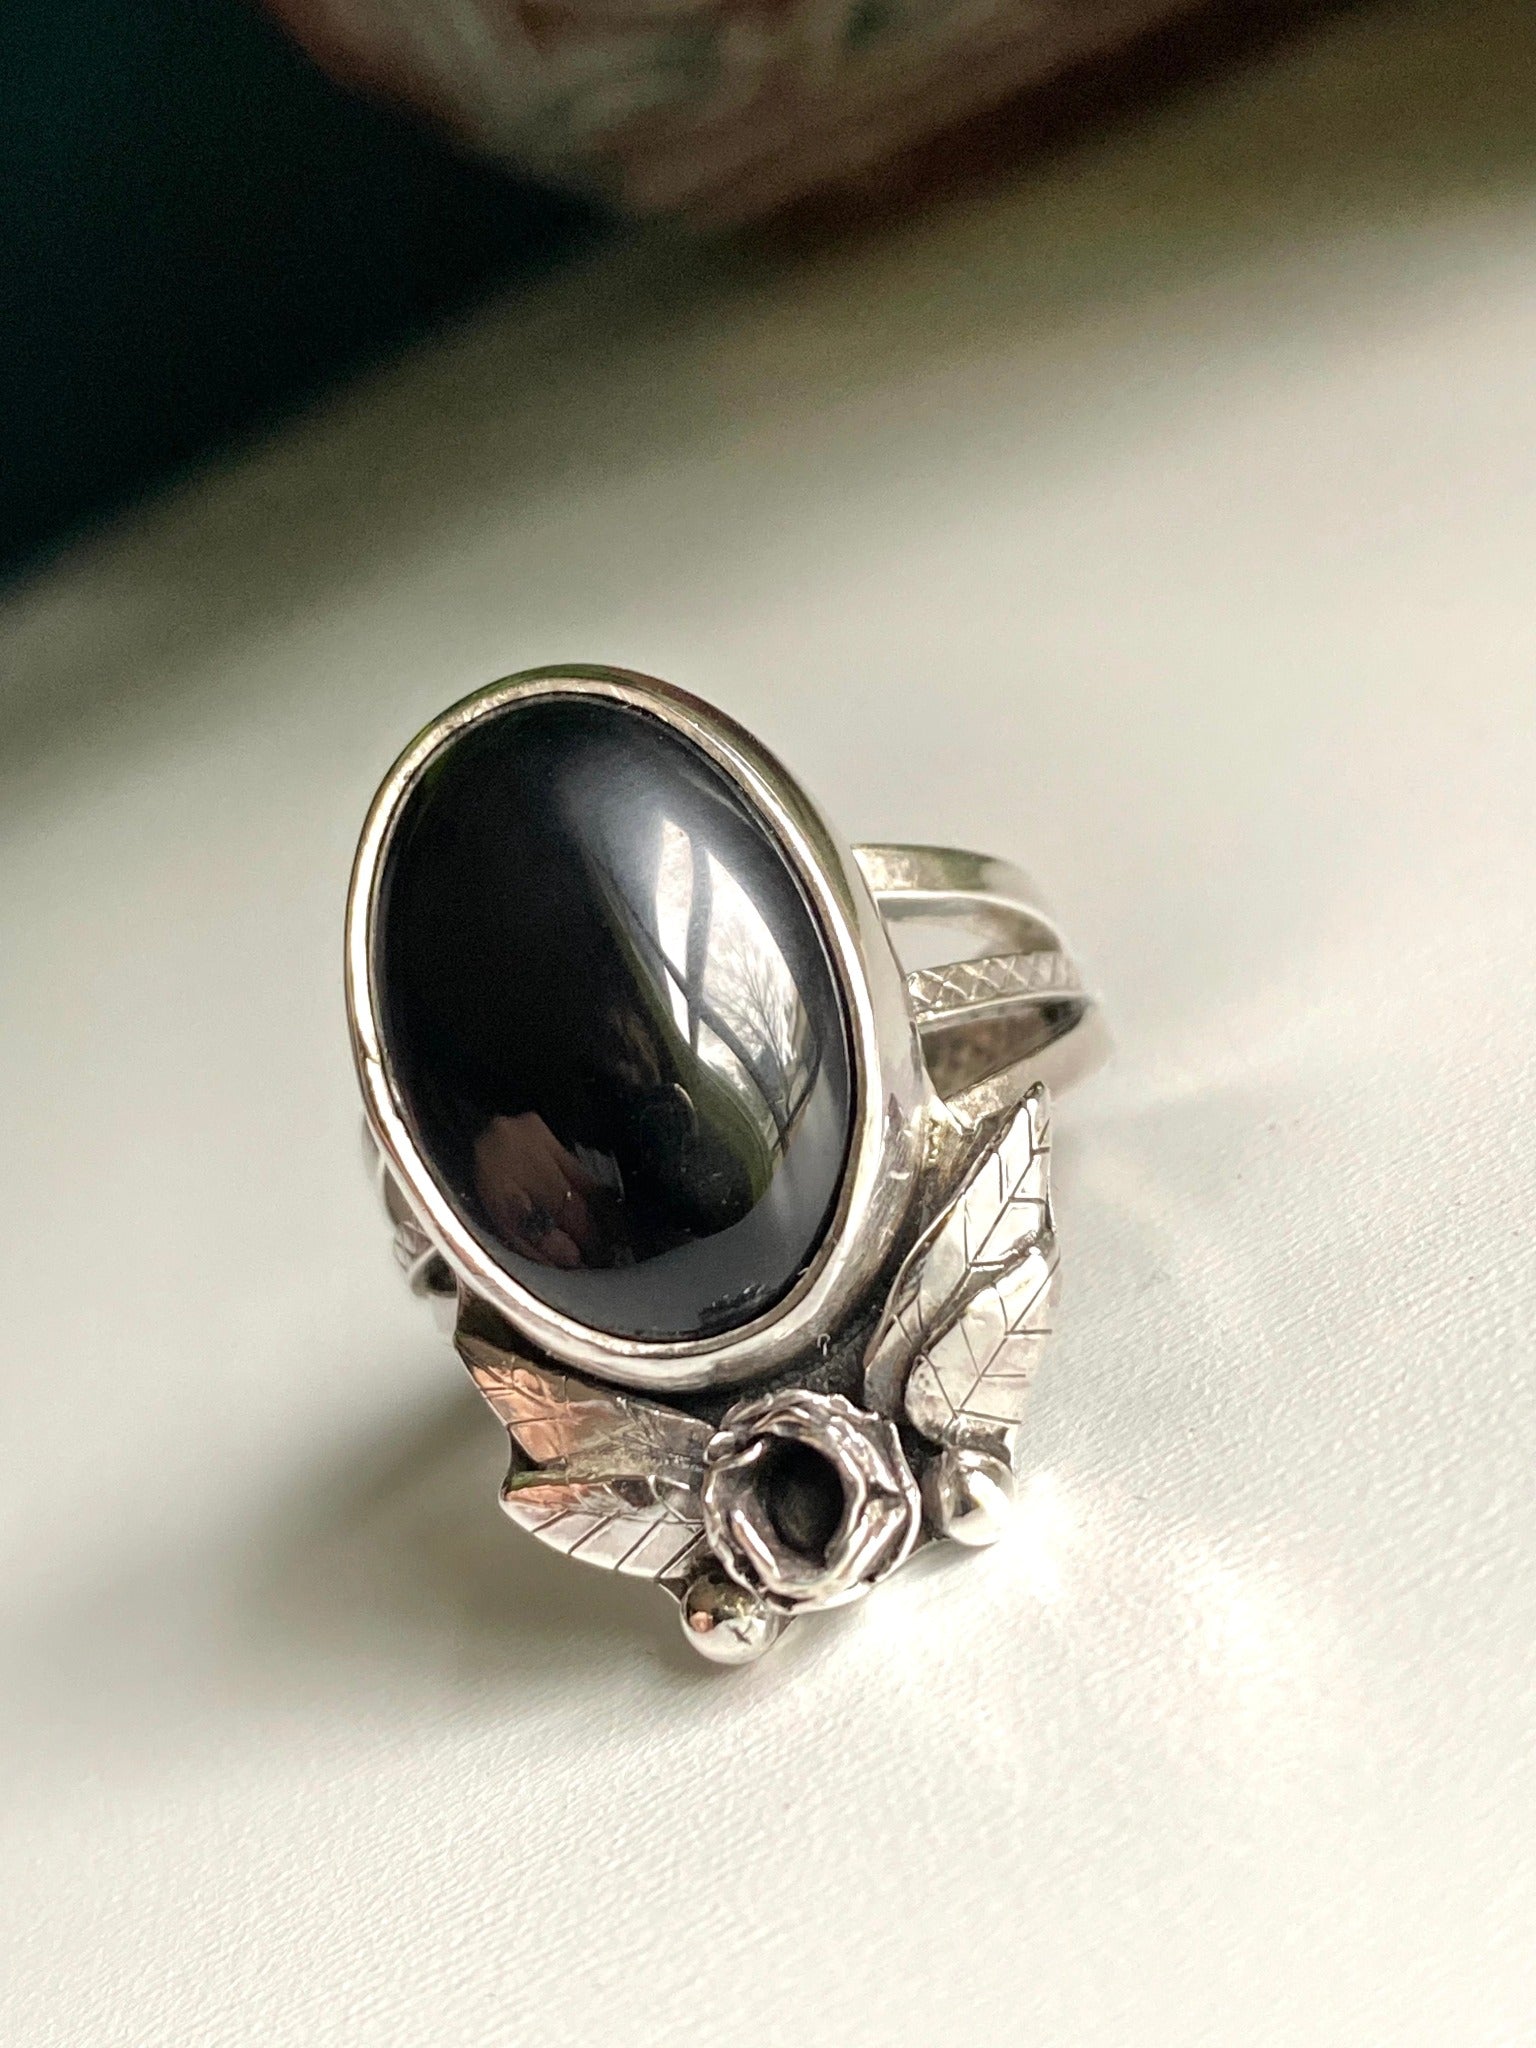 Onyx rose statement ring, Large onyx stone with rose below surrounded by 2 petals on each side, four total. hand carved leaves with two pieces of granulation at bottom. Ring is a triple strand shank two smooth square bands and one square middle band with tiny detail work looking like lattice.